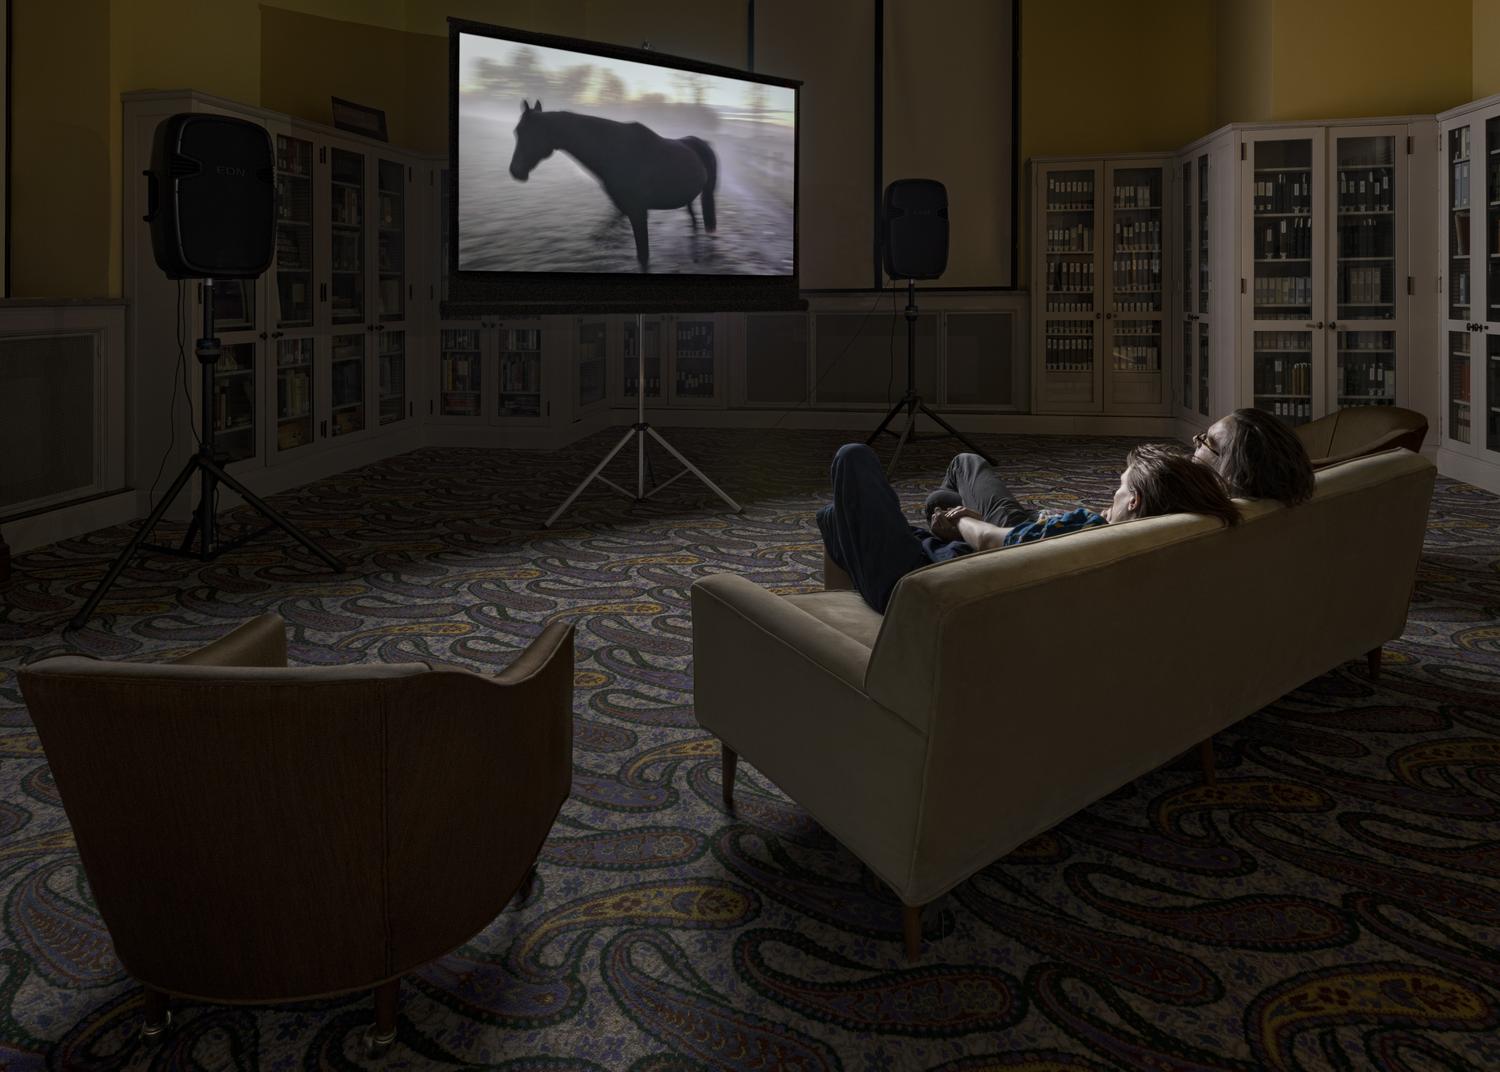 A projector screen in a dimly lit library shows an image of a horse, slightly blurred, as if in motion. Two people sit closely next to one another on a couch, watching the screen.